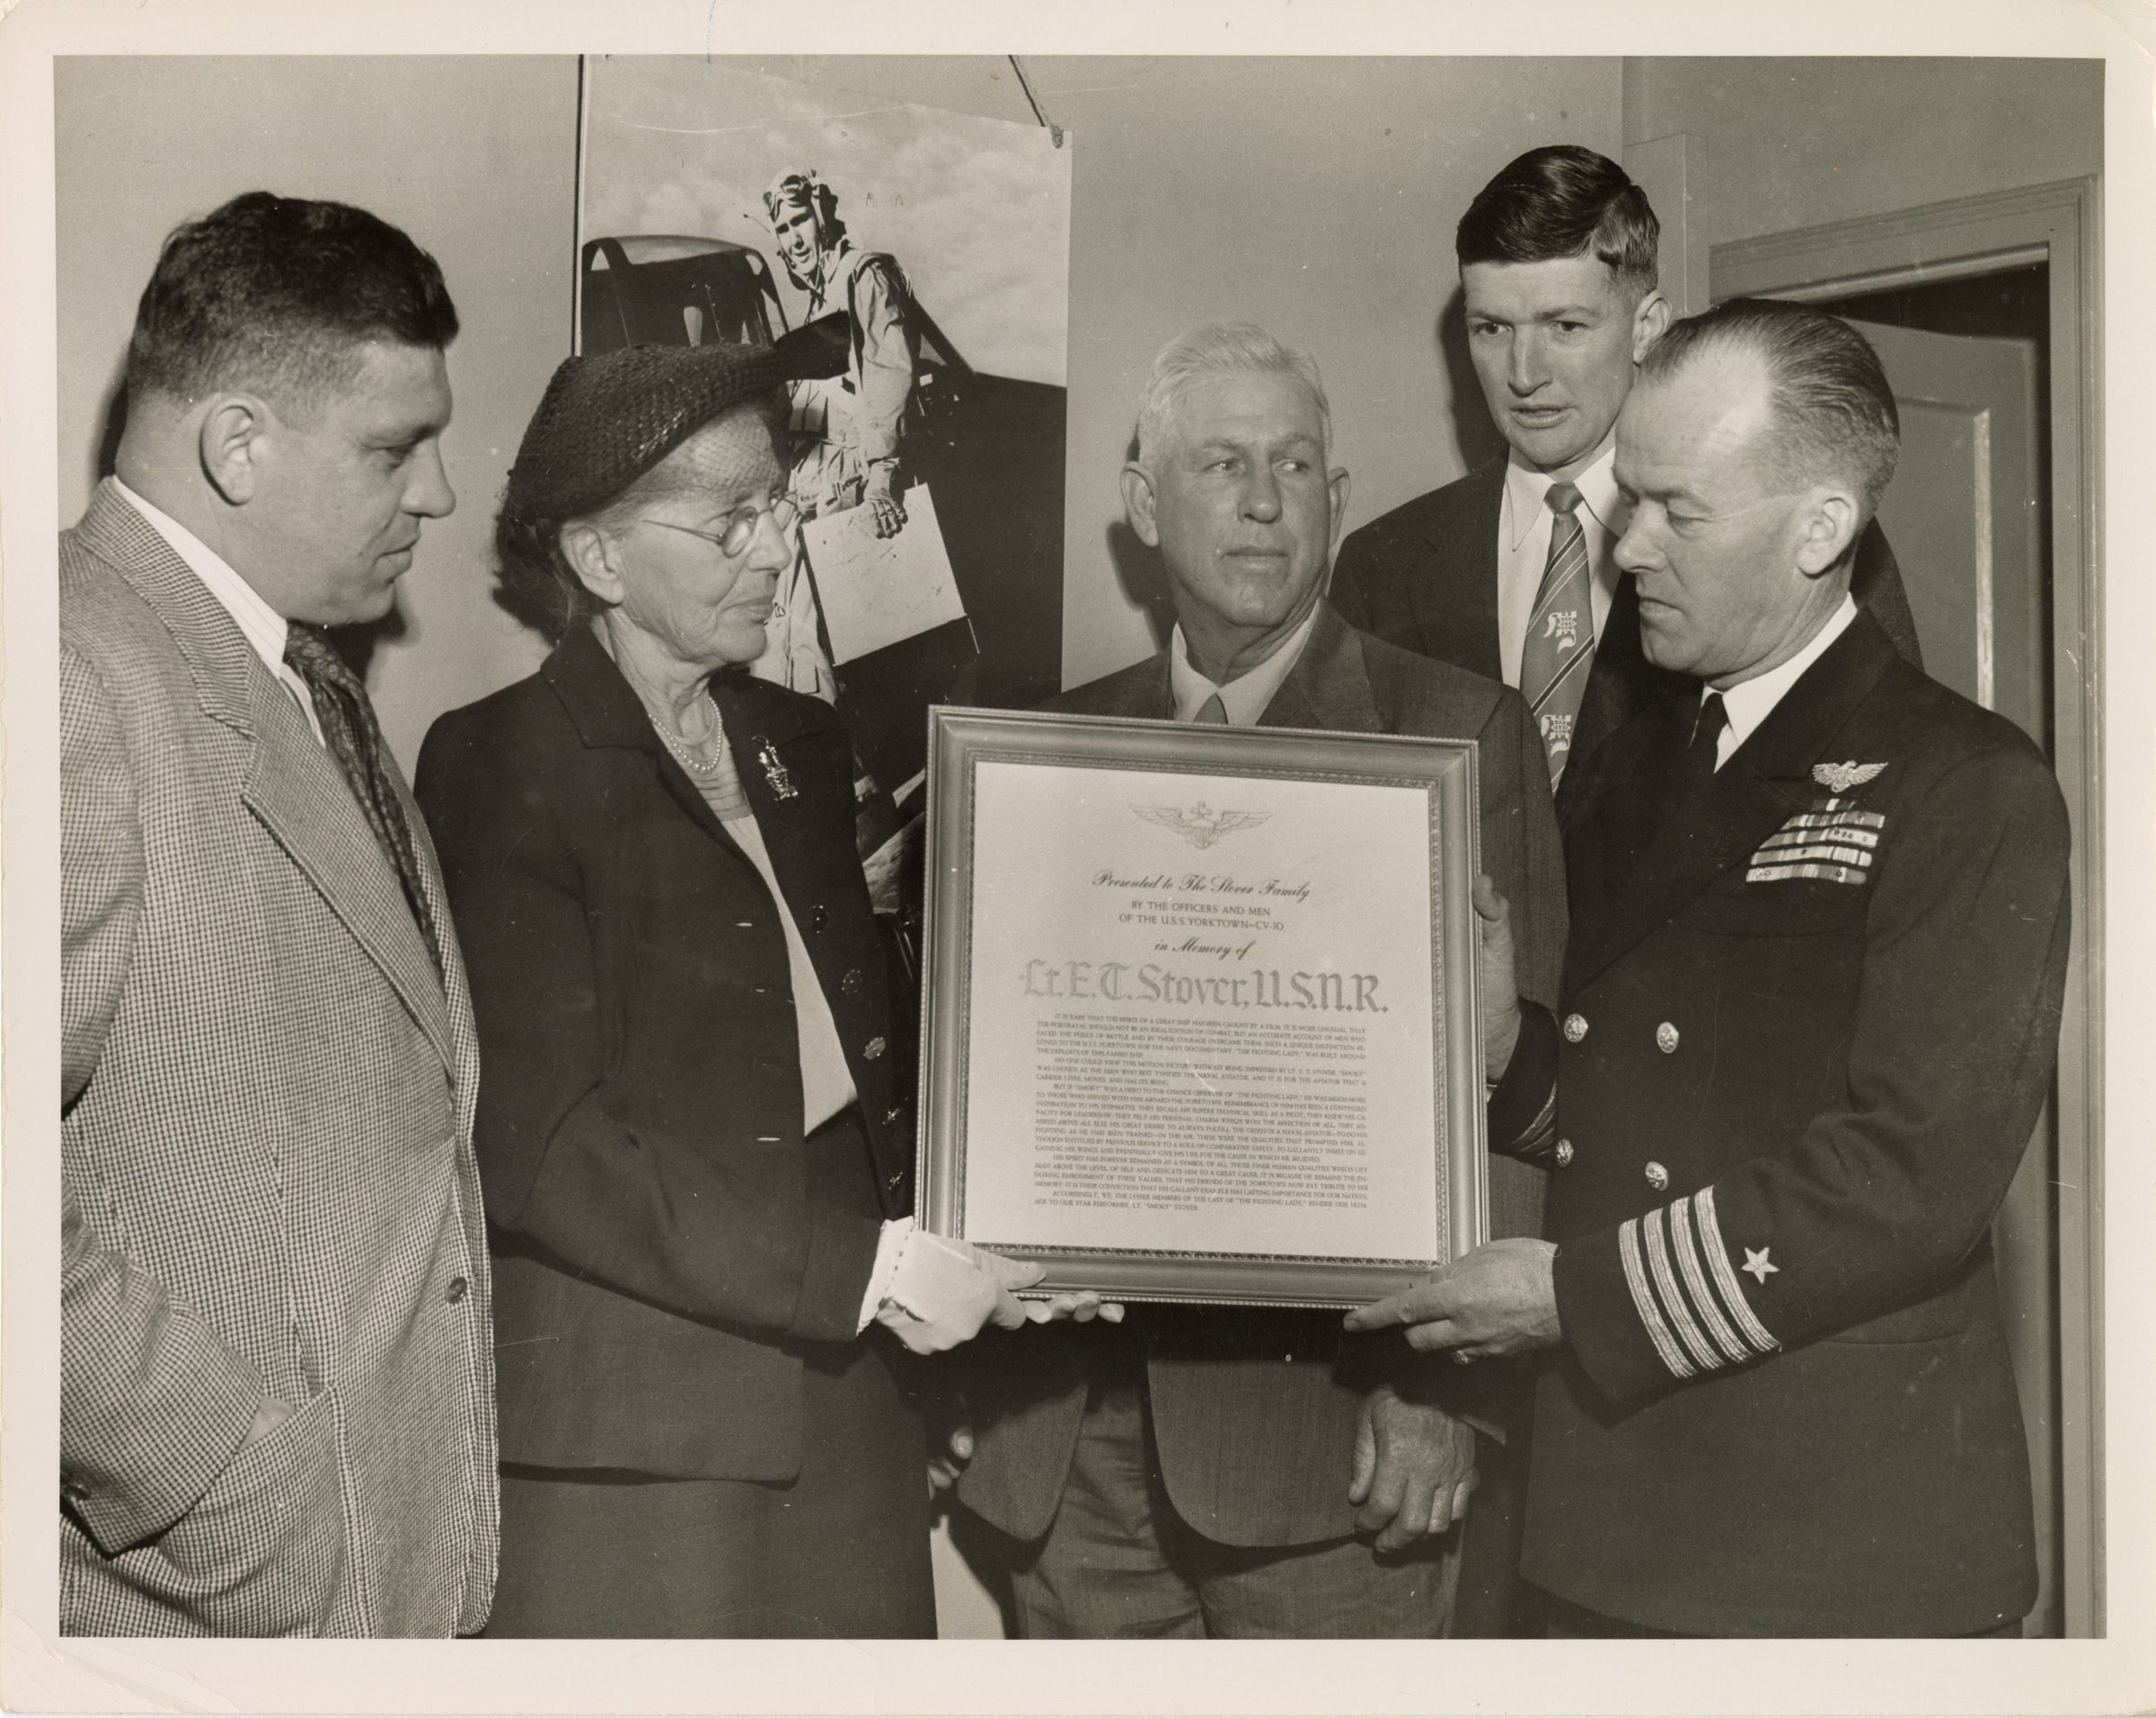 Primary Image of The USS Yorktown Association Honors the Parents of Elisha 